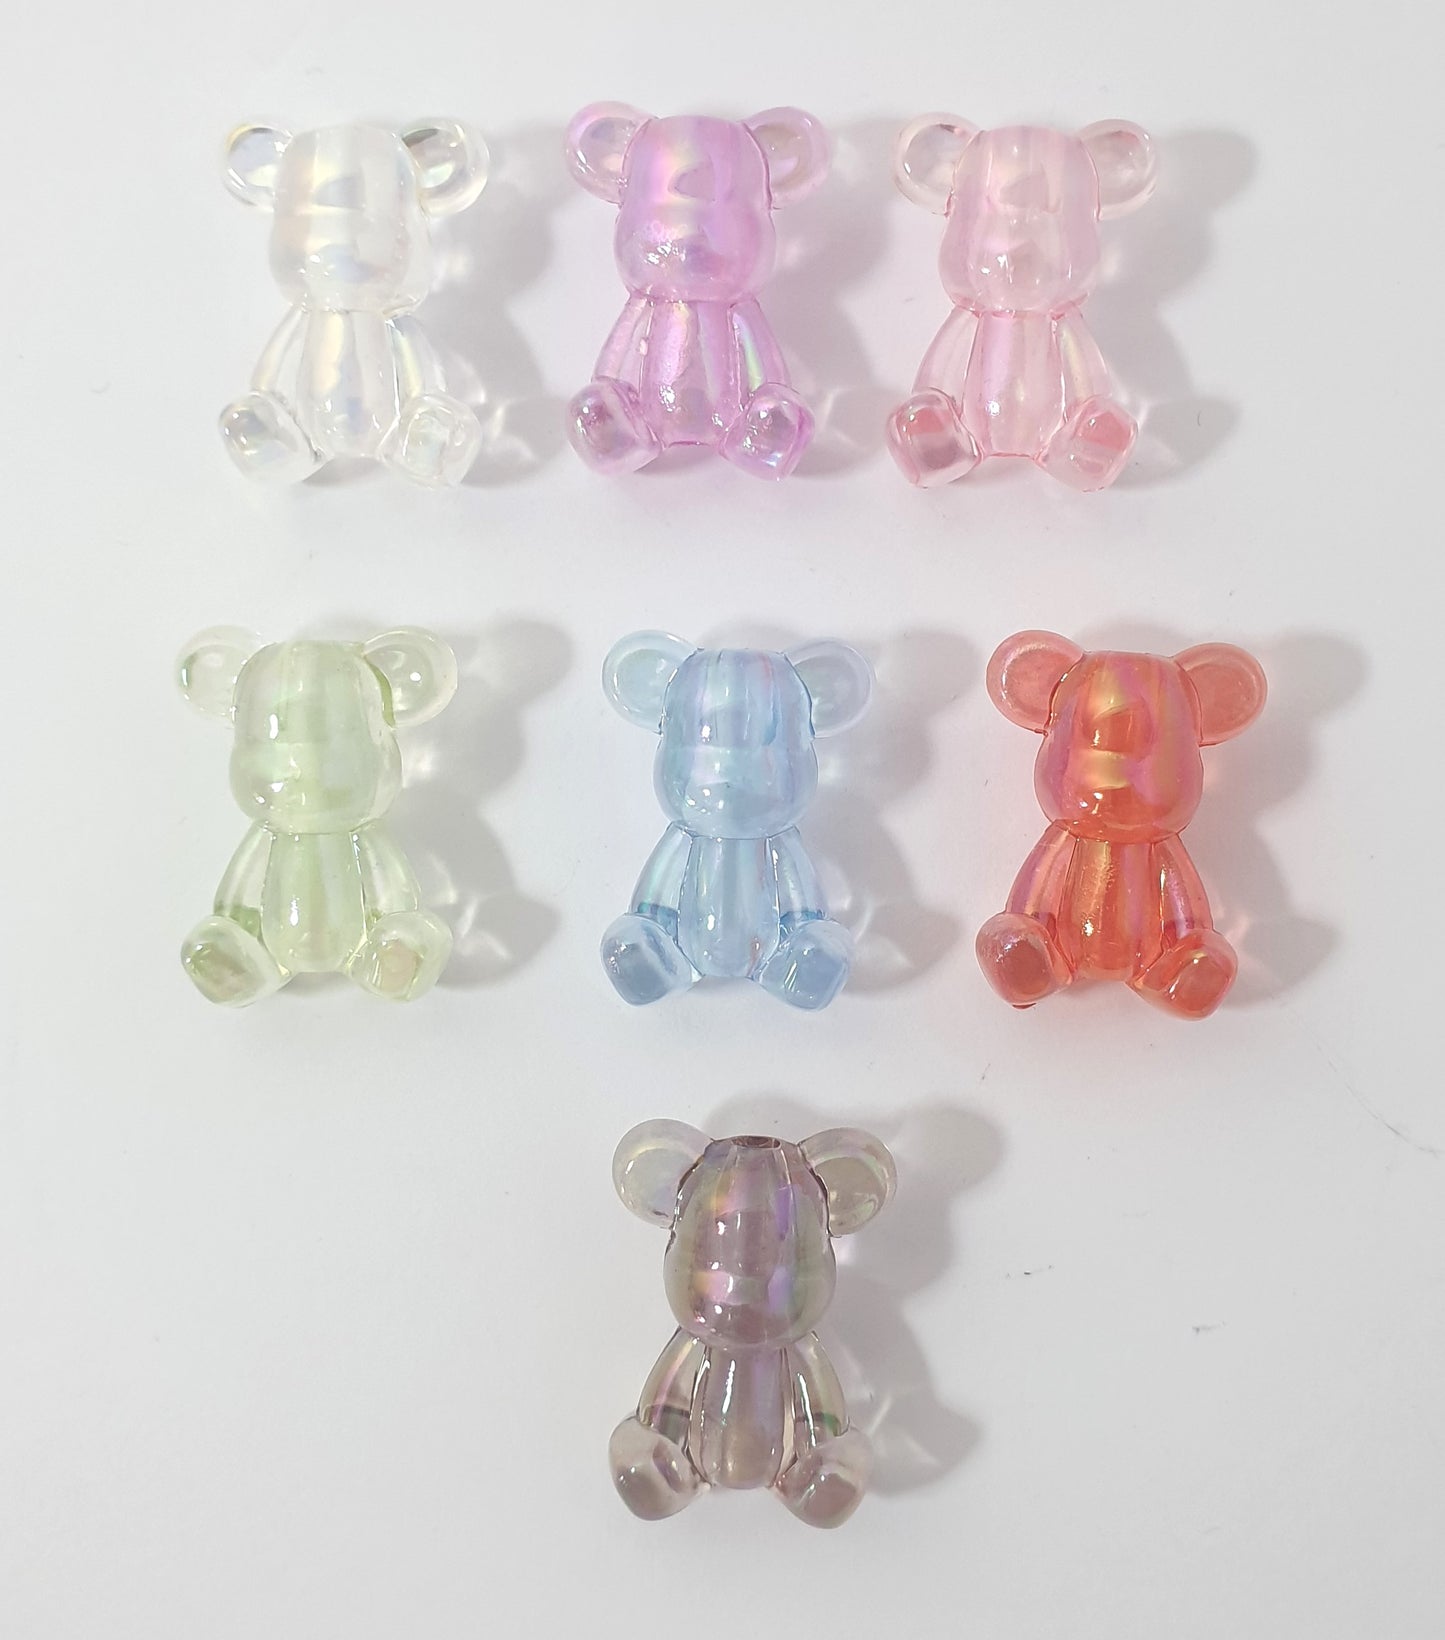 Bears Transparent. Receive 5 Bears. Fit on beaded pens.